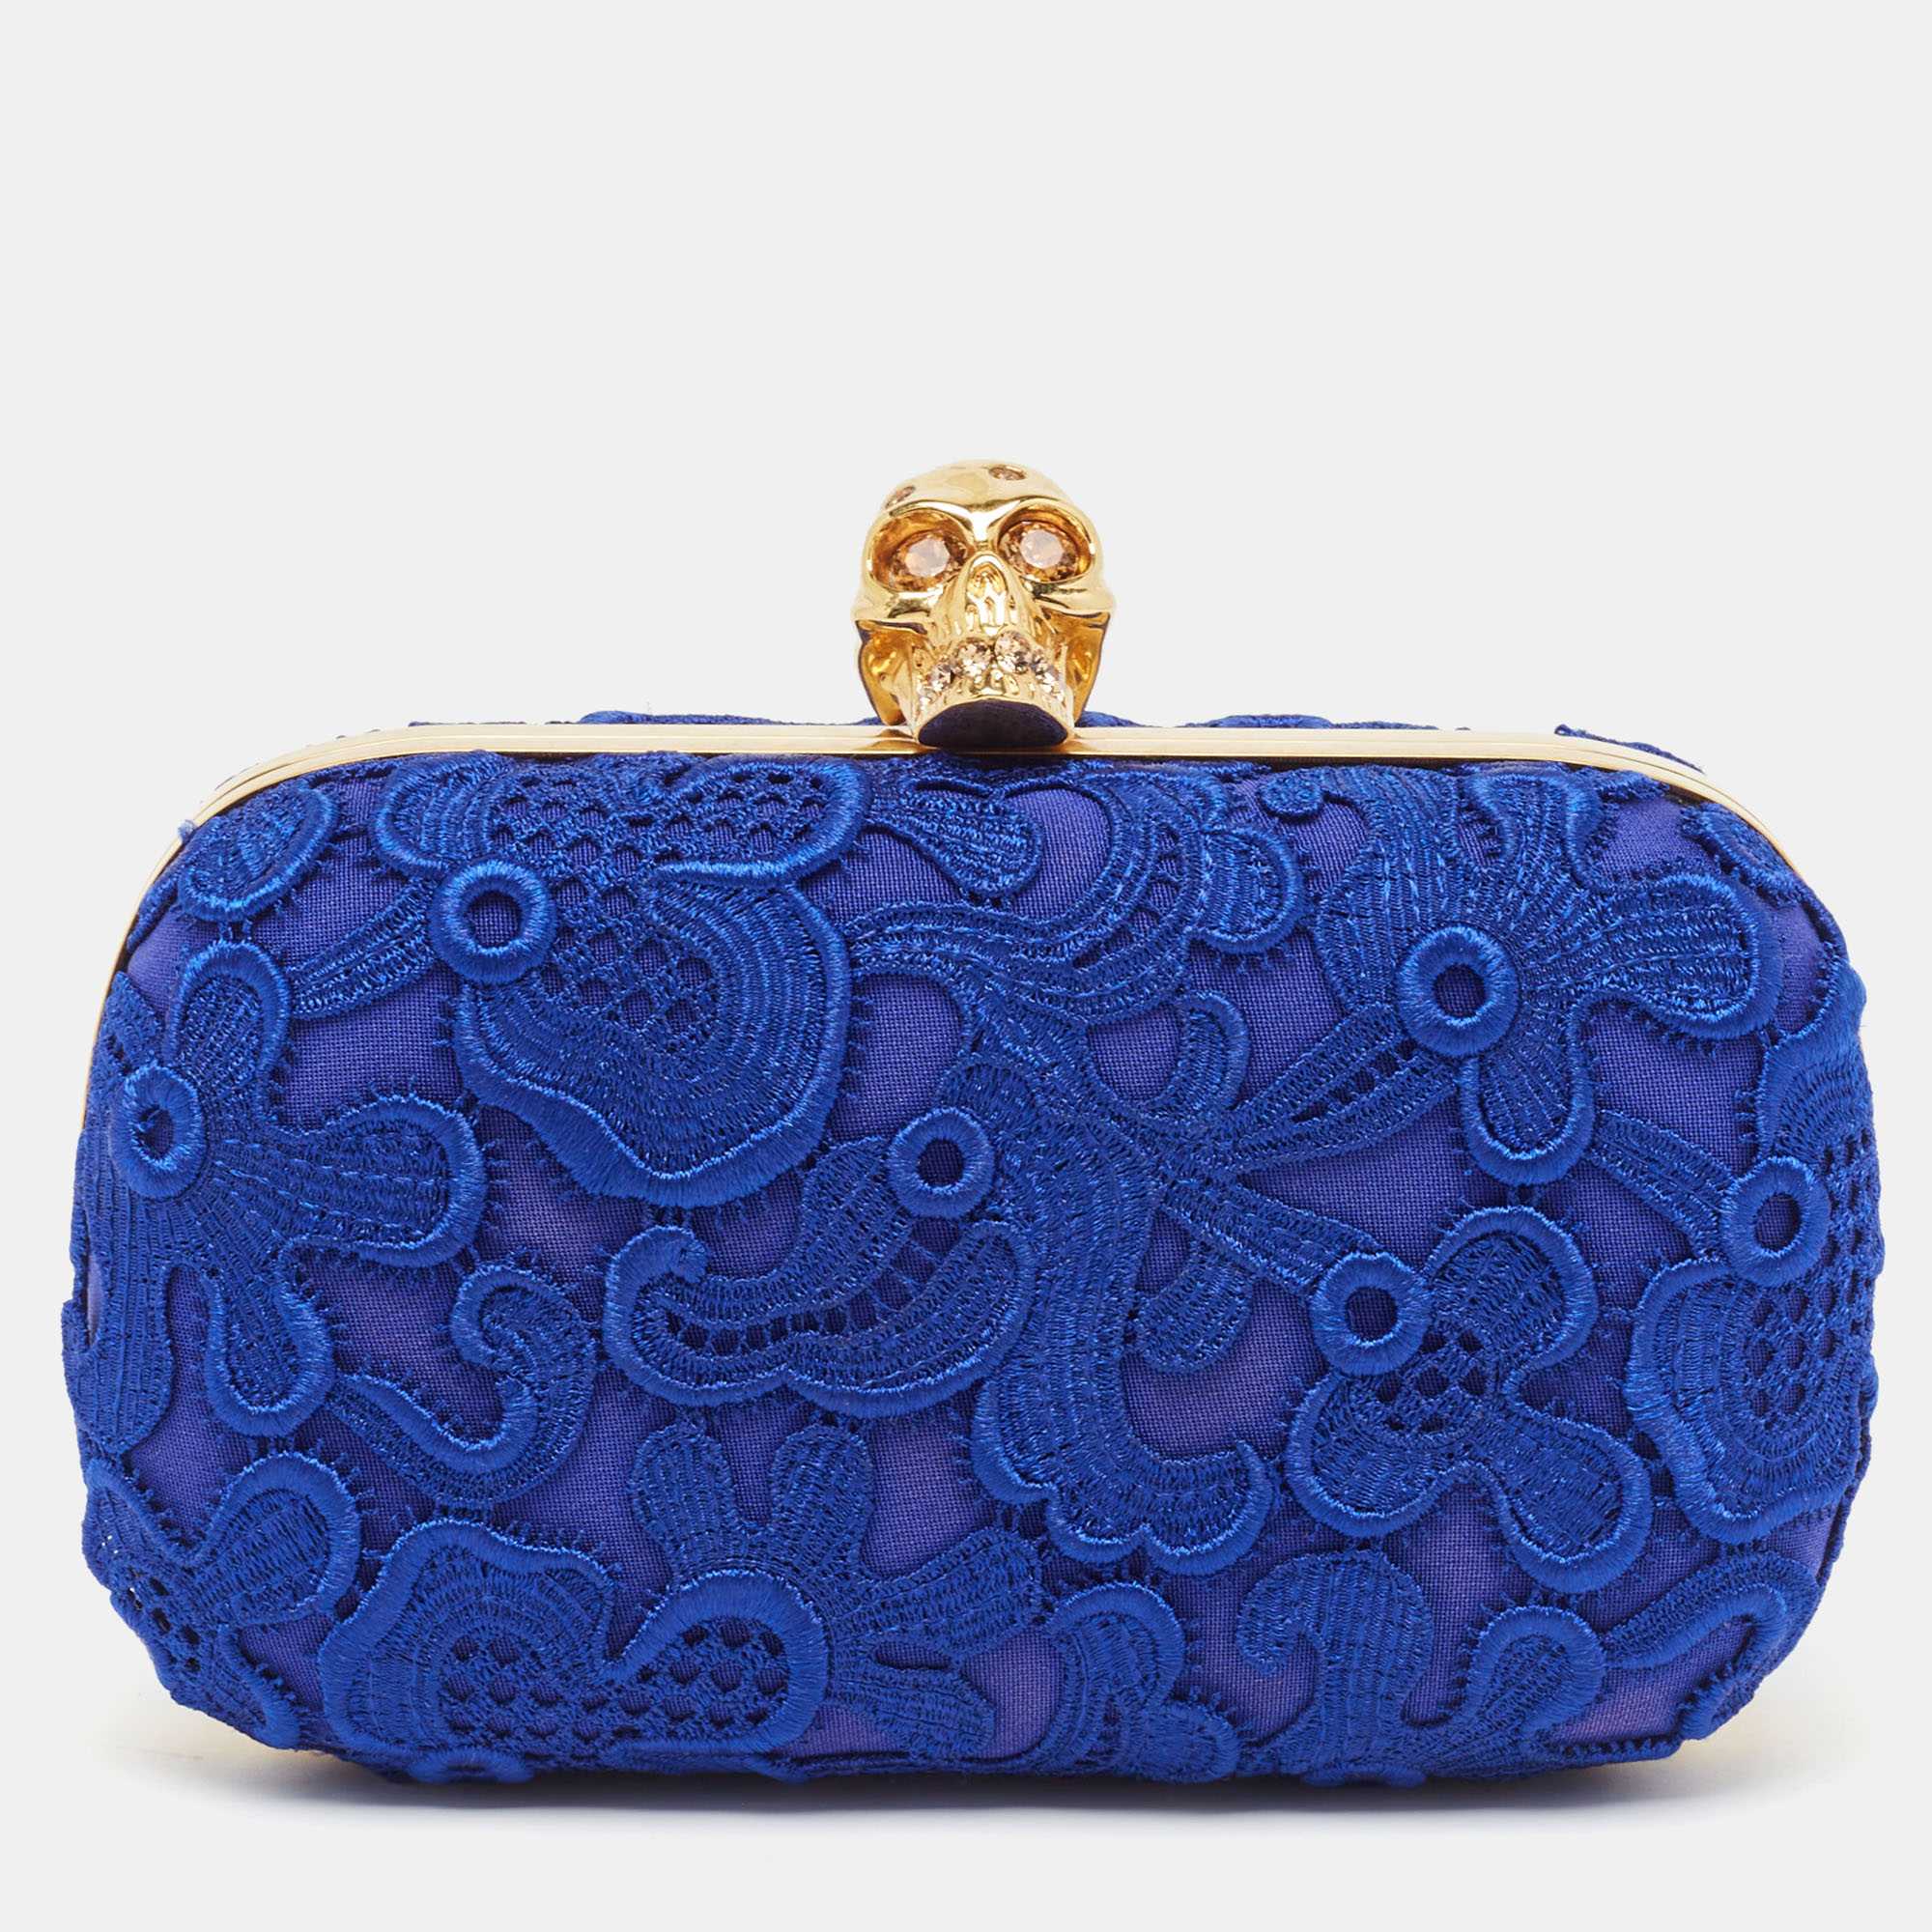 Pre-owned Alexander Mcqueen Blue Floral Lace Skull Box Clutch